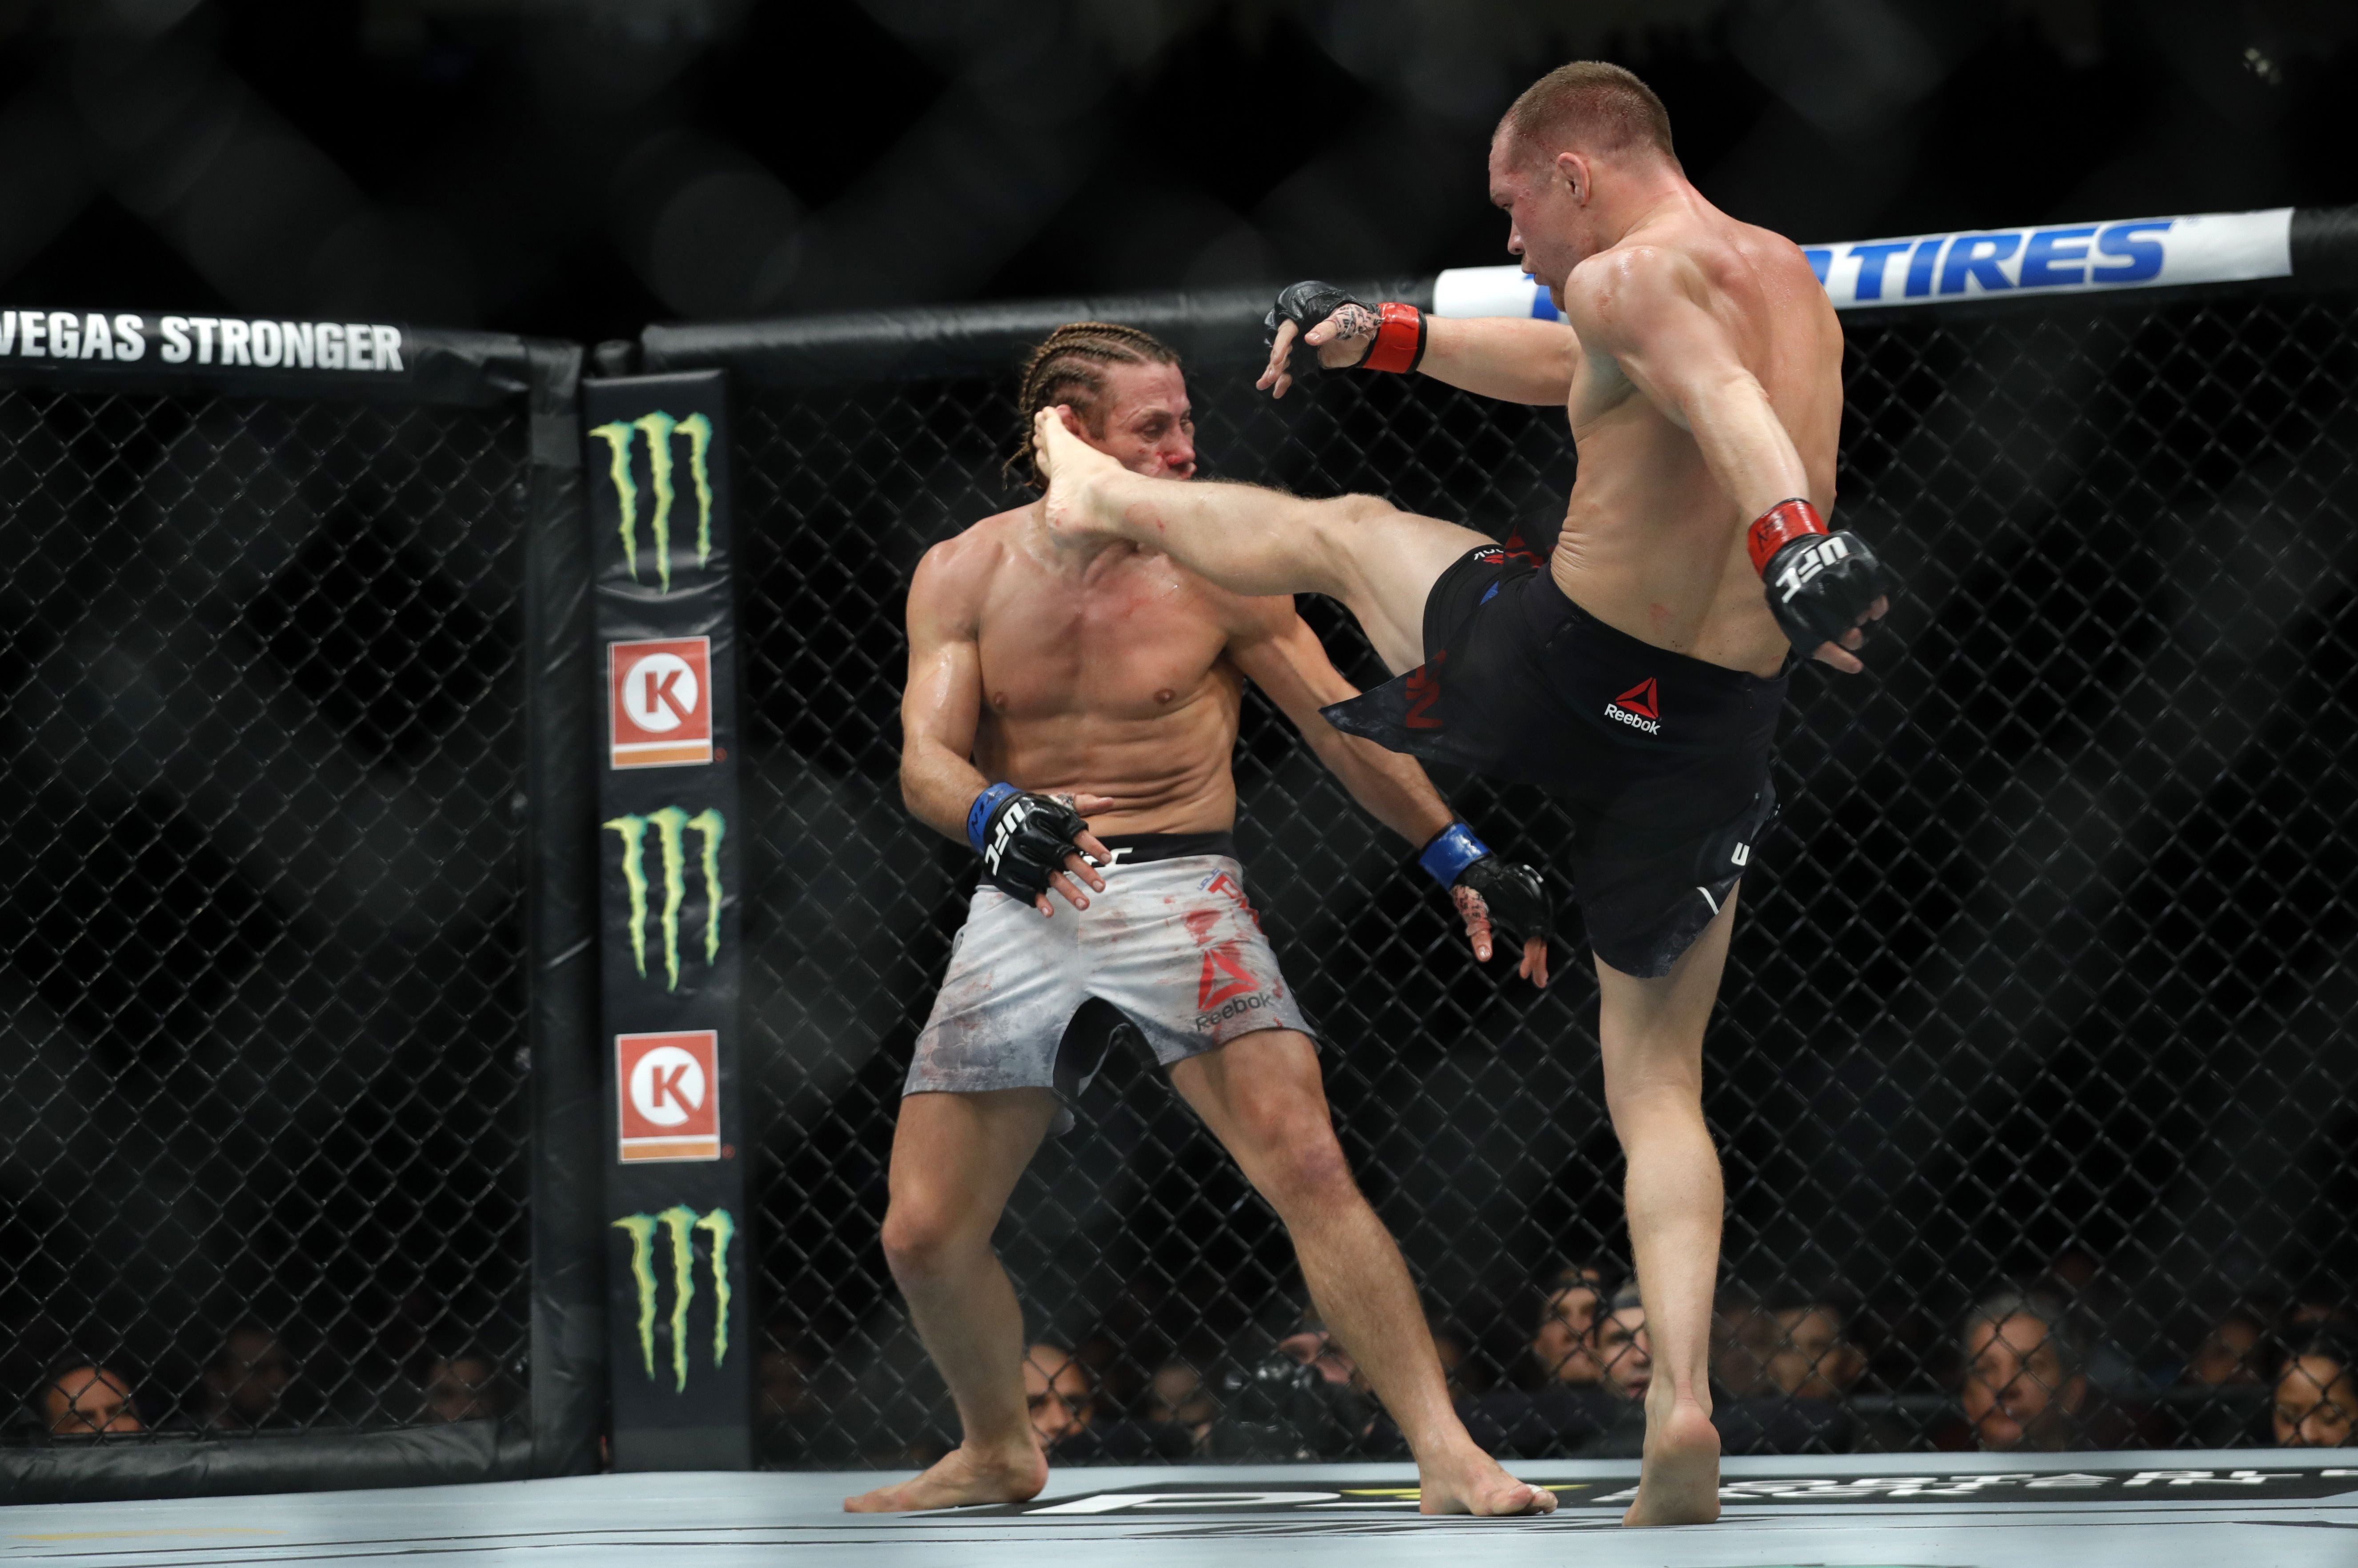 Petr Yan lands a kick on Urijah Faber that sends him to the canvas in the third round of their bantamweight fight during UFC 245. Photo: AFP